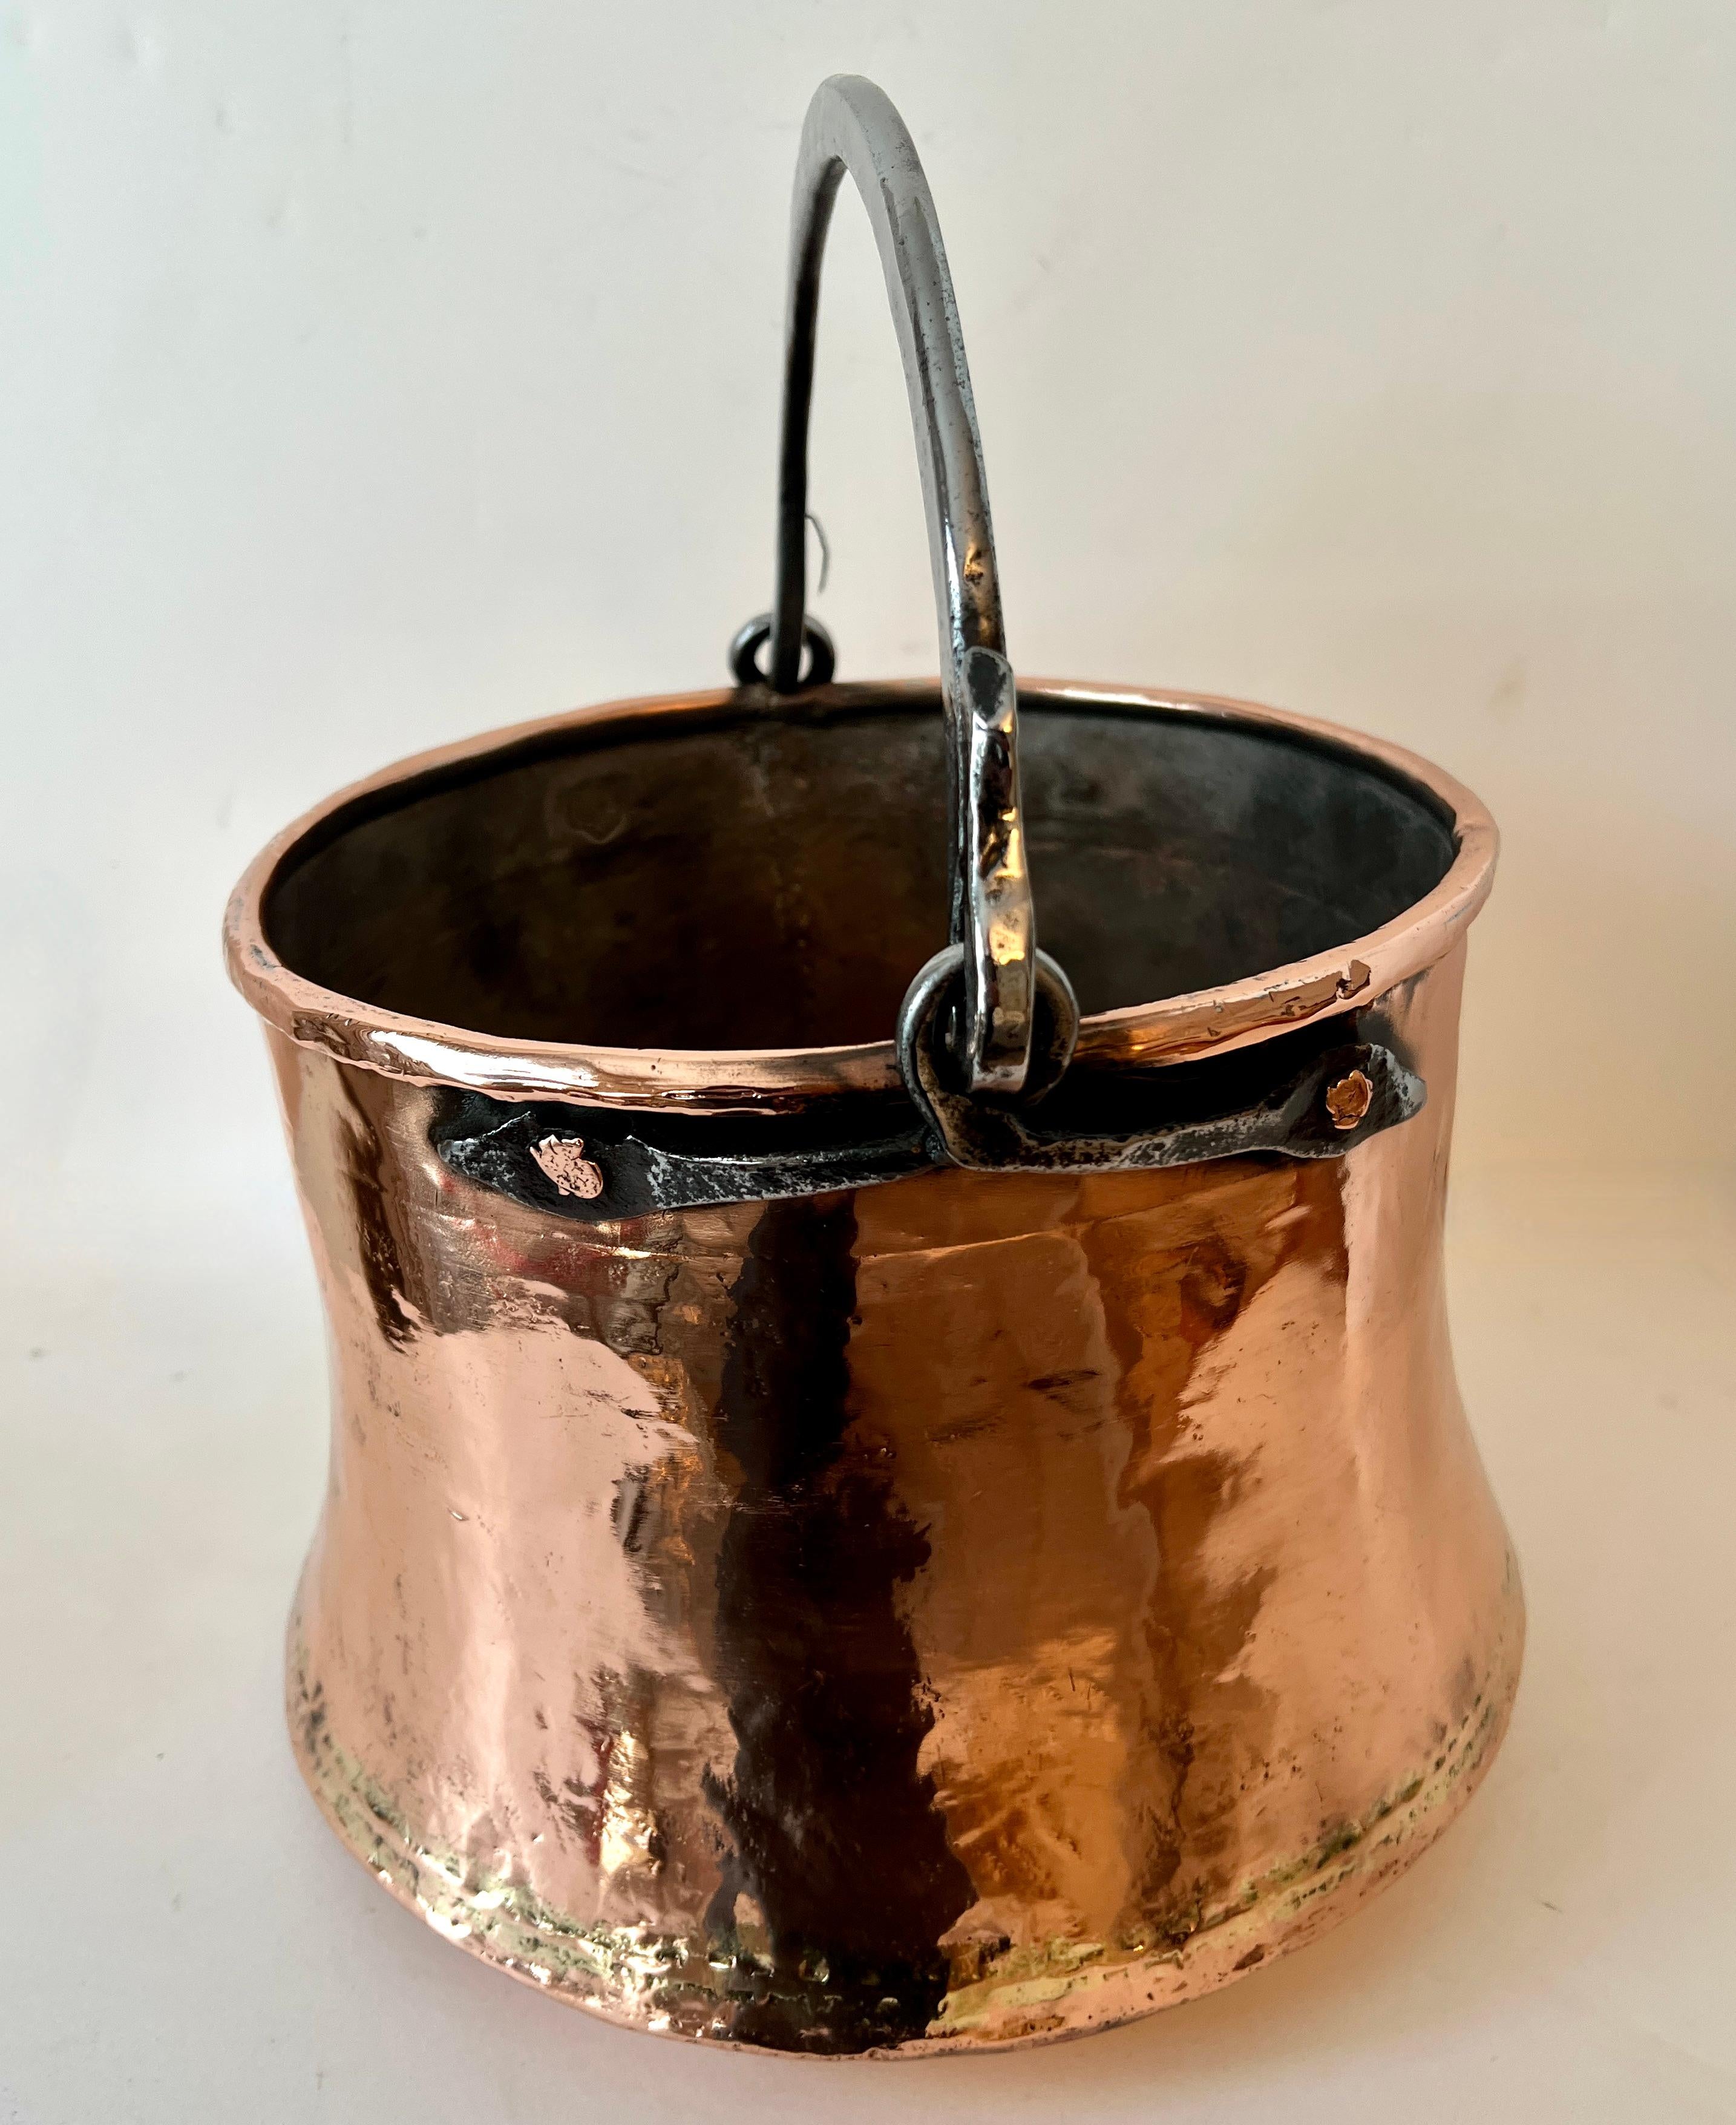 a 19th Century pot, lovely hanging in a decorative kitchen that you never use... a cpmpliment as a jardiniere, centerpiece or planter, inside or out.

Polished to a high gloss that will never tarnish, like the love for this piece.